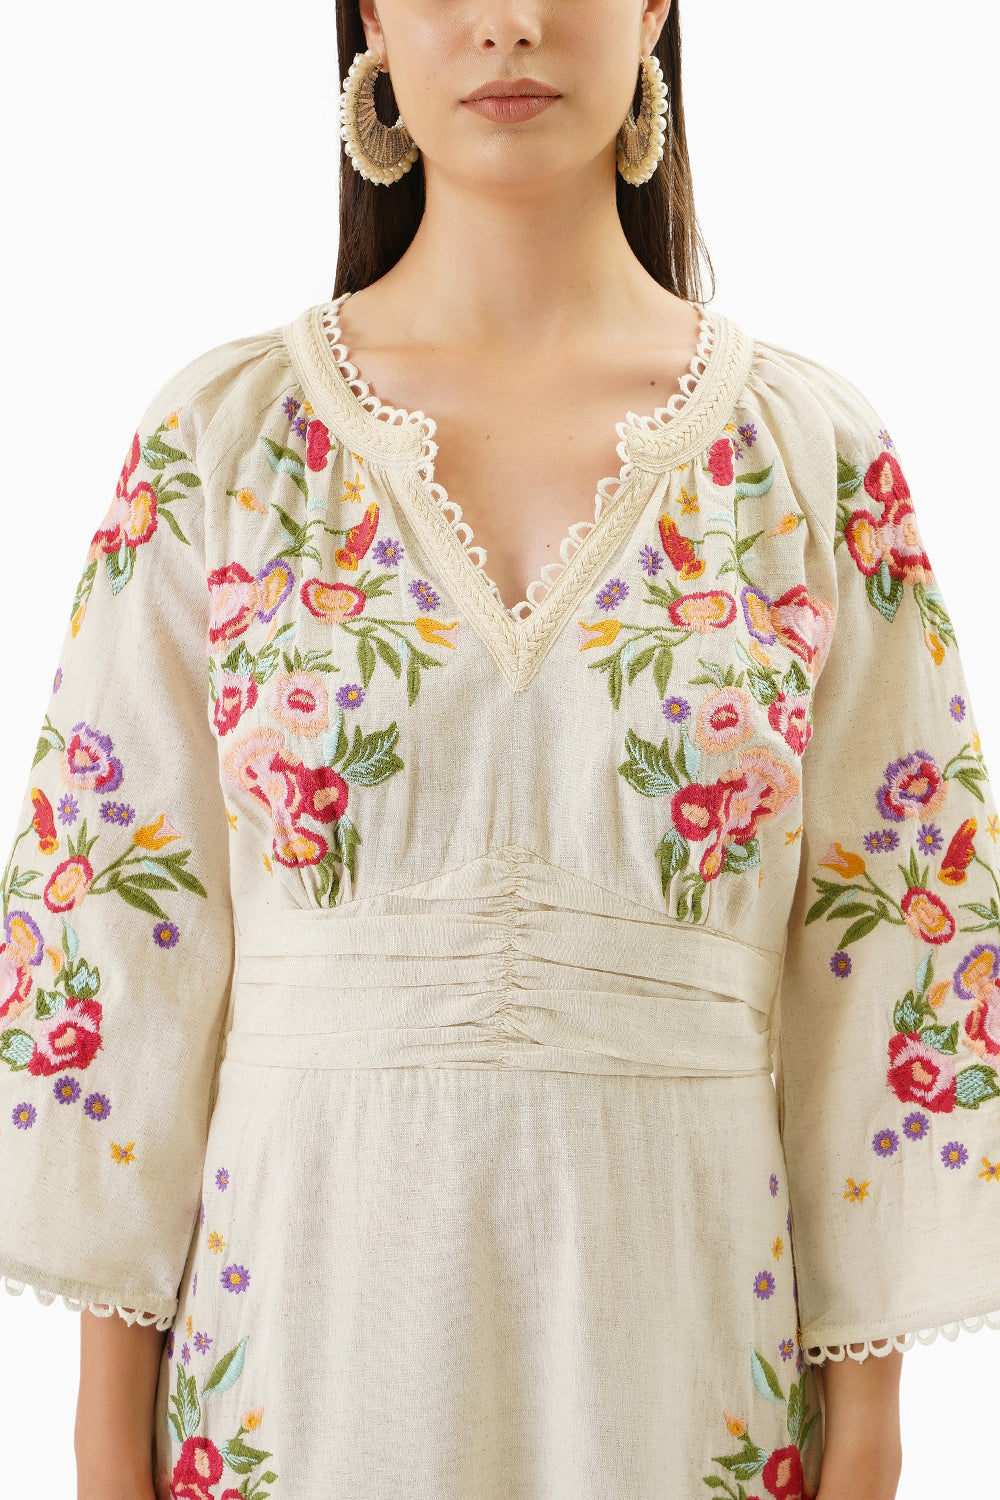 The Enchanted Embroidered Dress